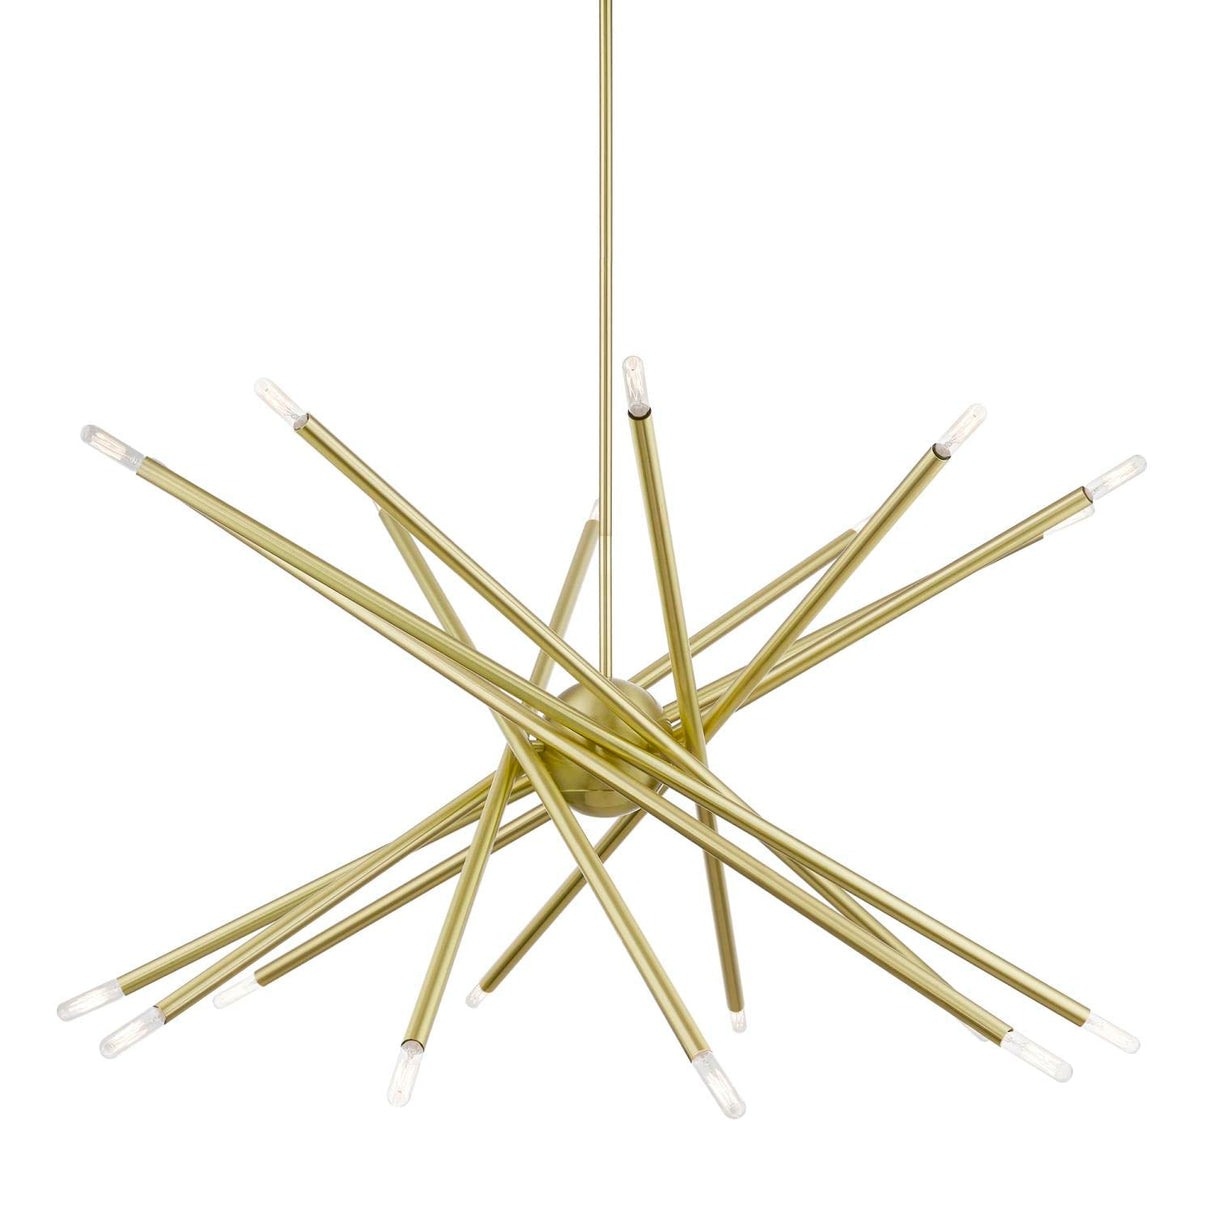 Livex Lighting 46779-12 Soho - 20 Light Large Chandelier In Transitional Style-36.5 Inches Tall and 37.5 Inches Wide, Finish Color: Satin Brass